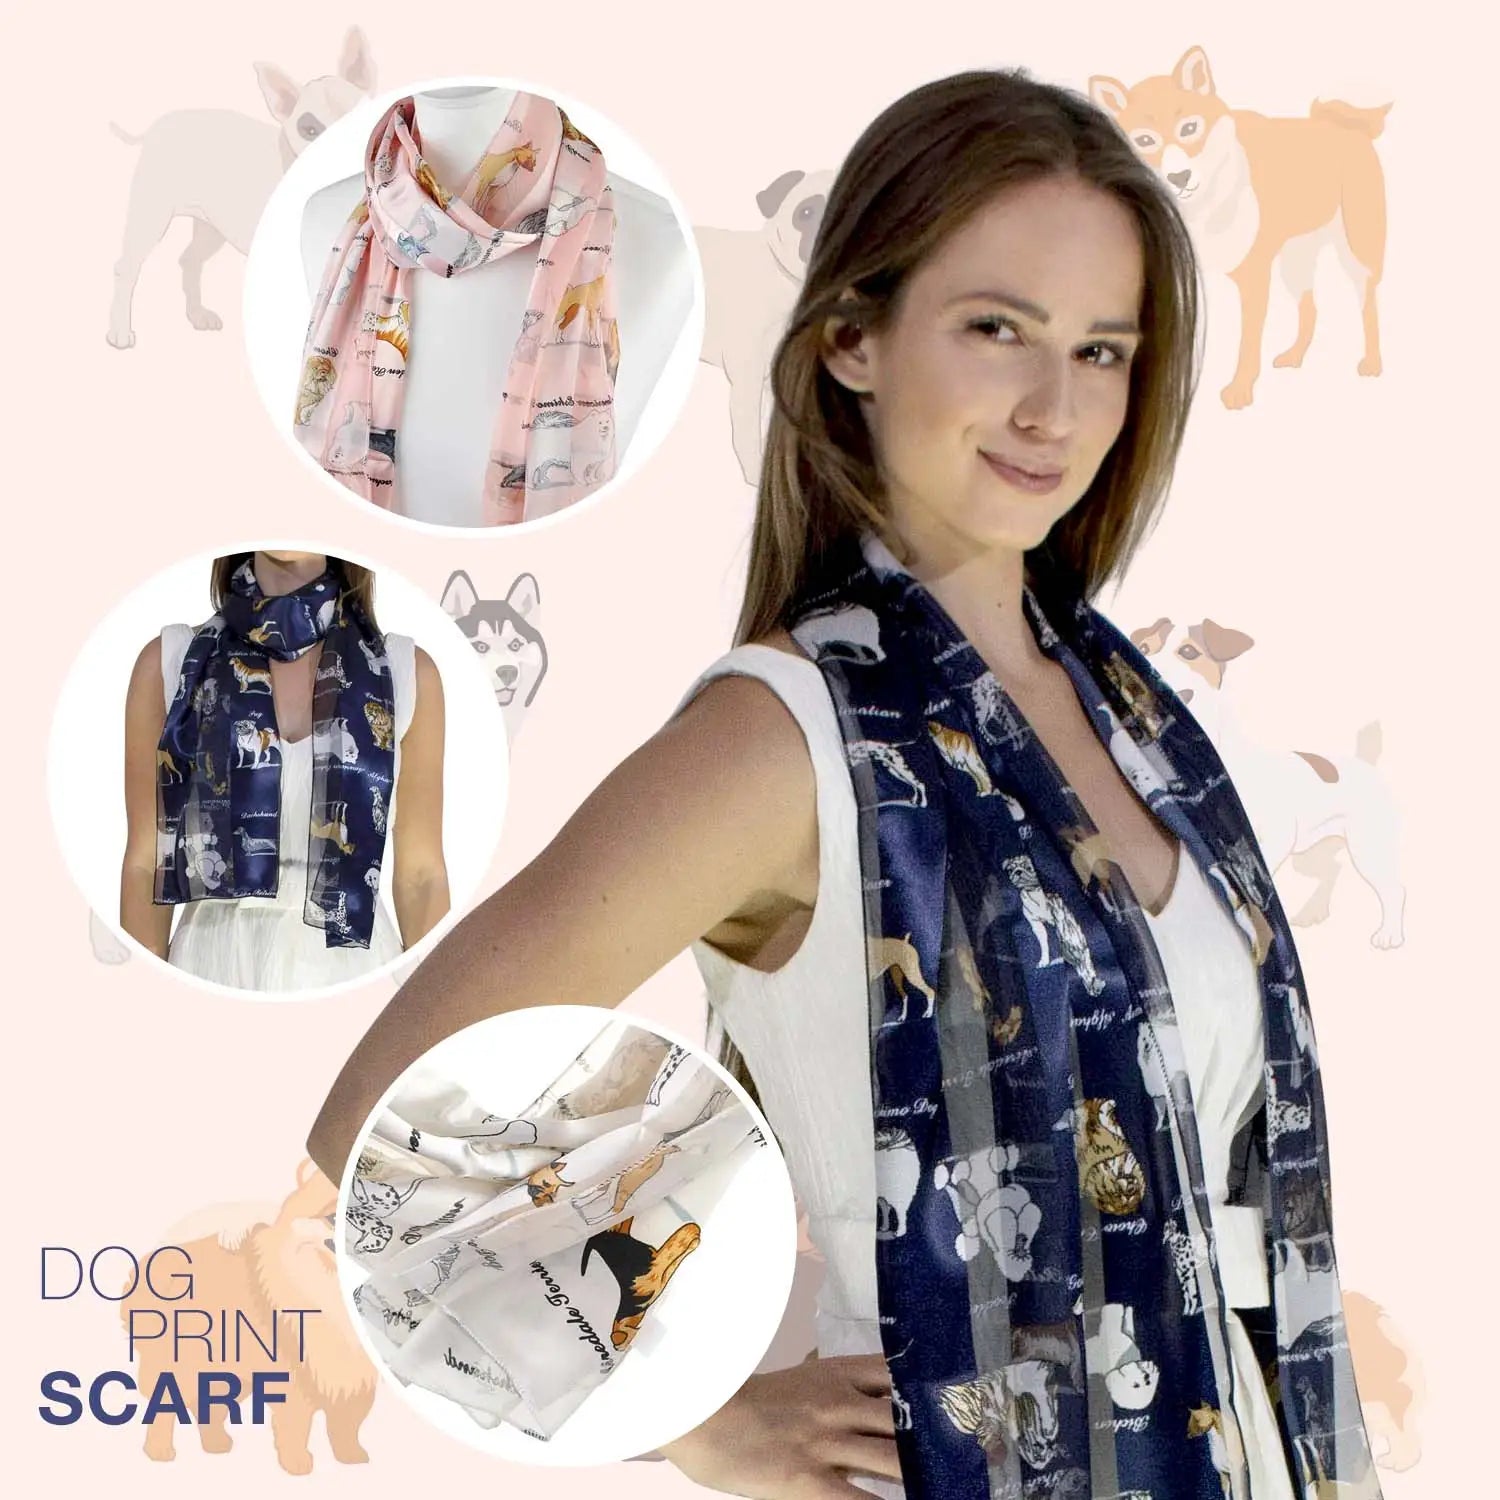 Soft Satin Multi Dog Breed Print Unisex Scarf featuring woman with a dog print scarf